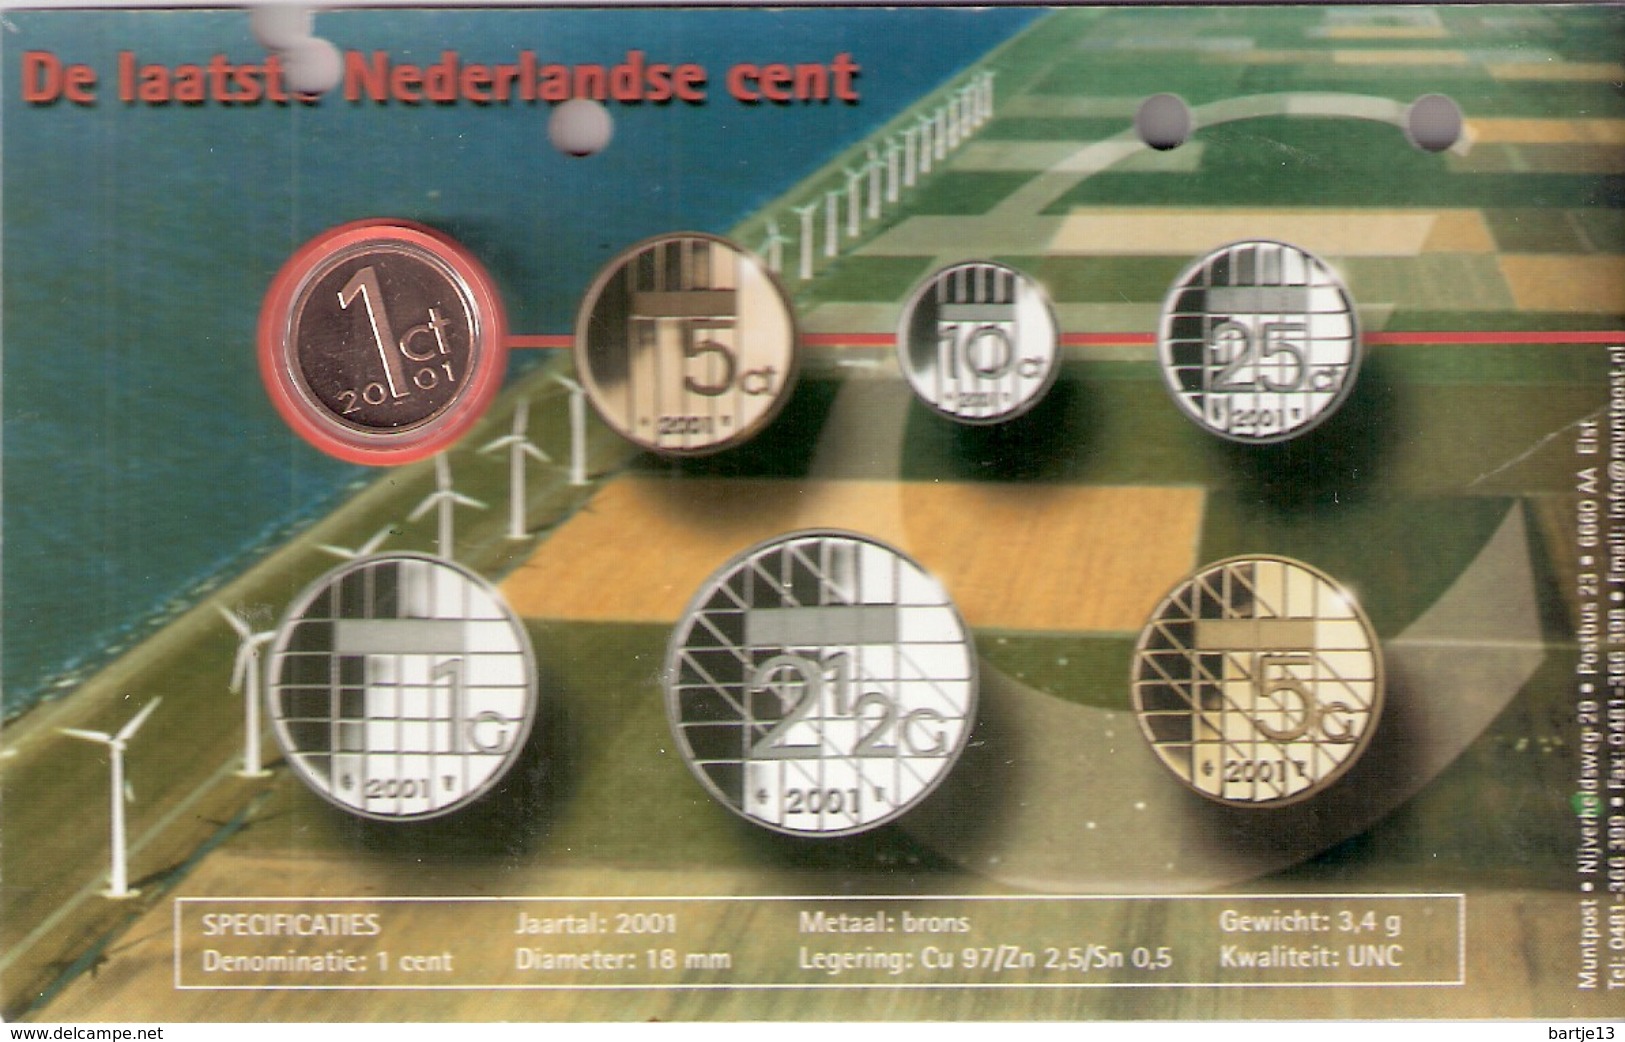 NEDERLAND LAATSTE CENT 2001 BEATRIX - NEVER ISSUED IN CARD - Monnaies Commerciales